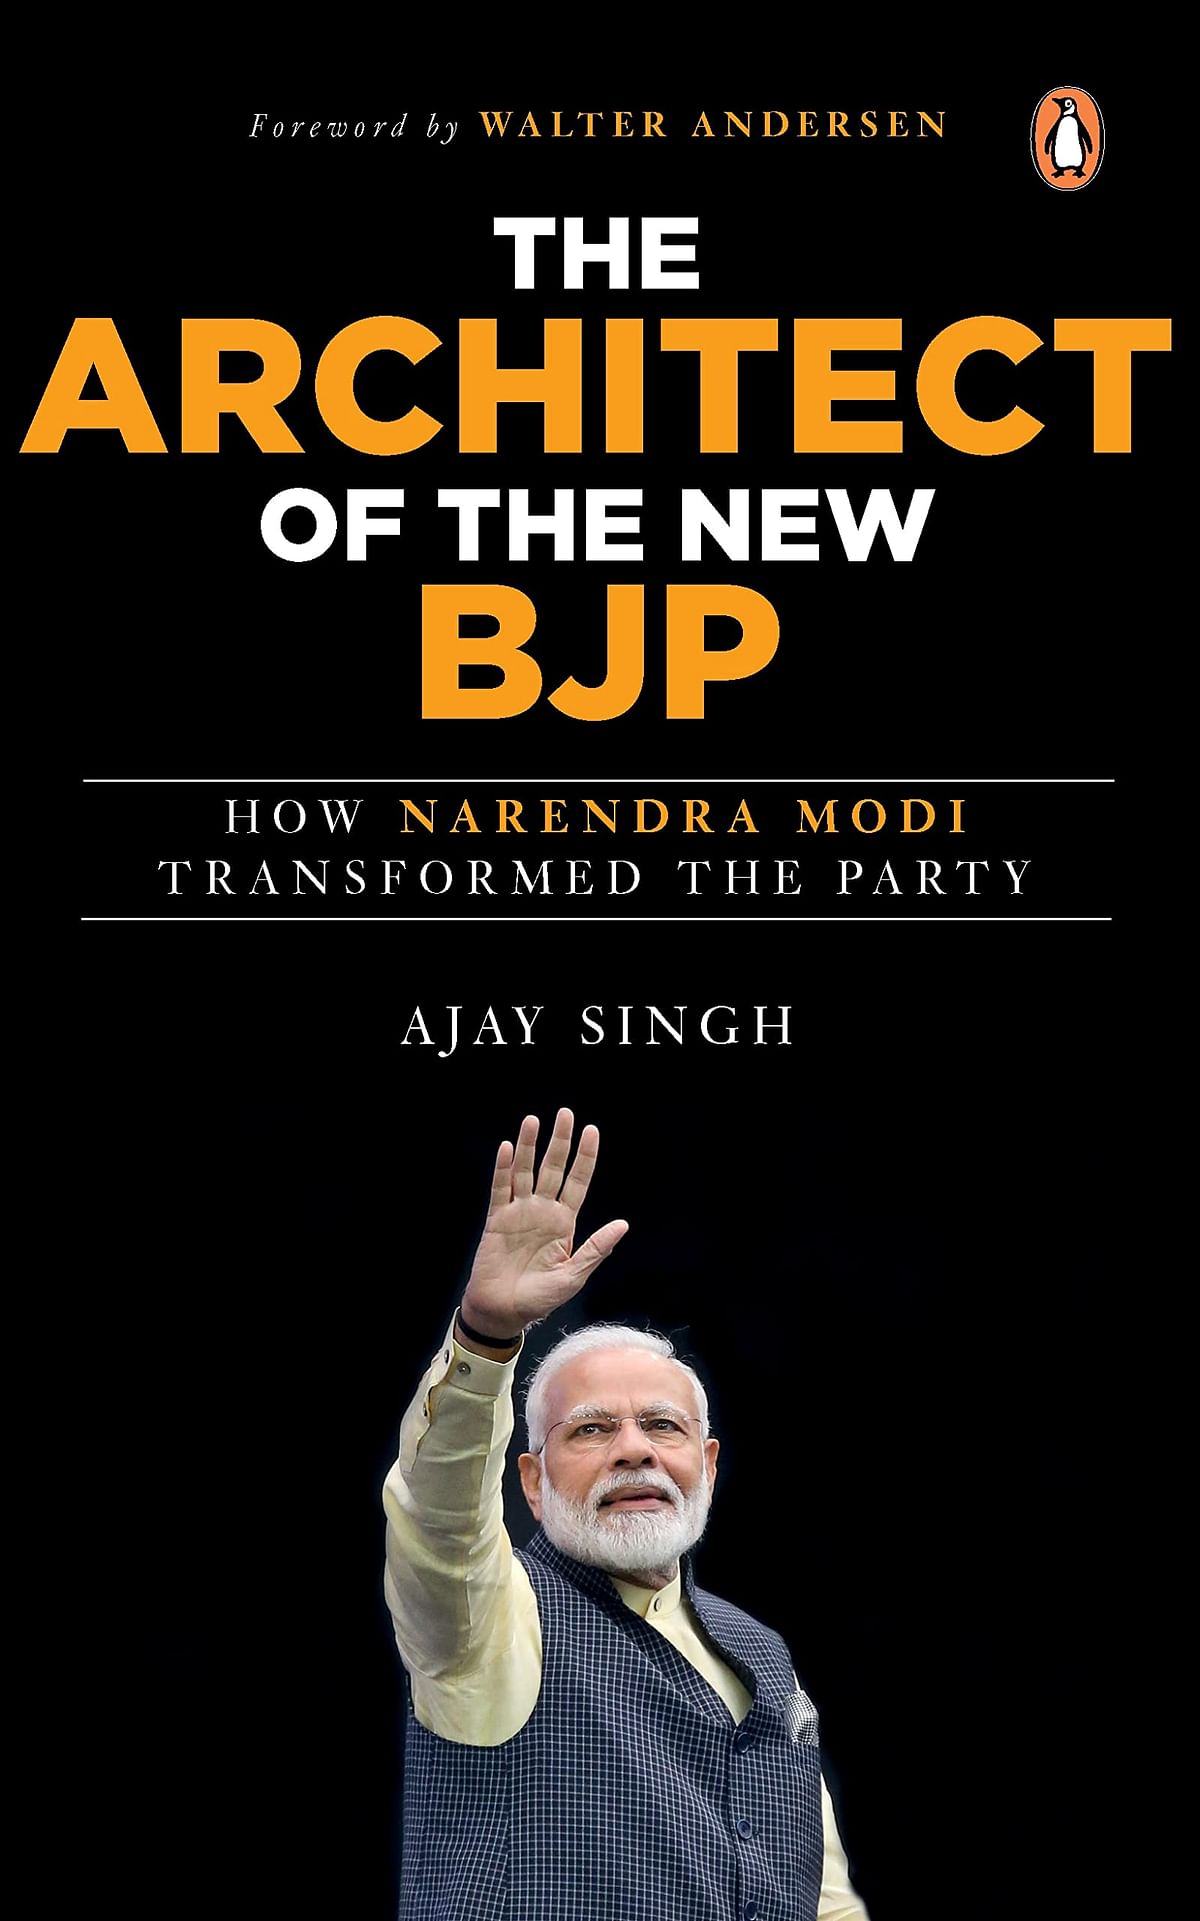 A book delves into the grassroots transformation of the party under Narendra Modi. 